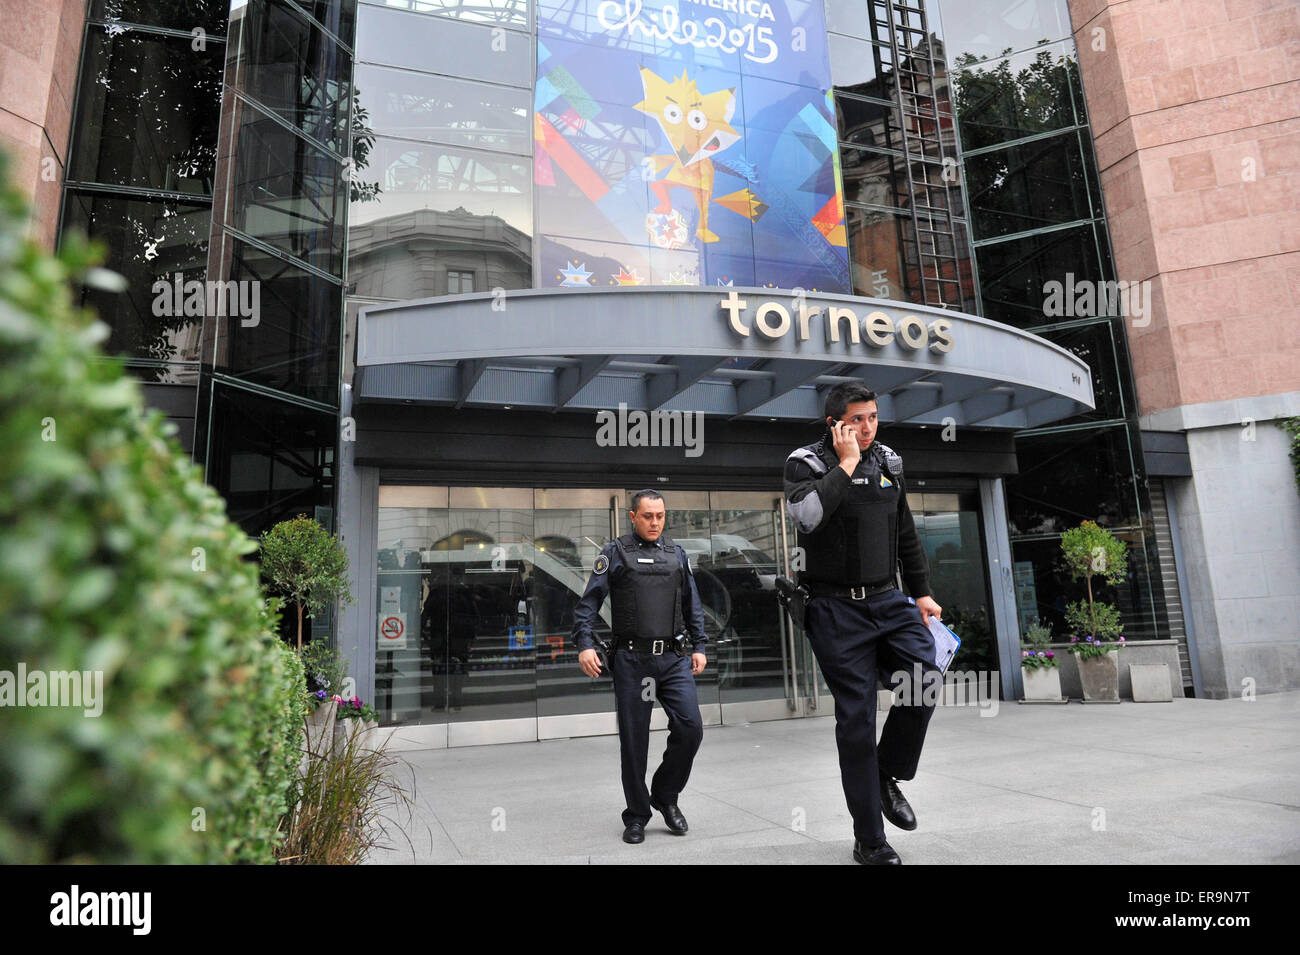 (150530) -- BUENOS AIRES, May 30, 2015 (Xinhua) -- Personnel of the Interpol Department of the Federal Argentine Police are seen at the headquarters of Argentine sports broadcaster Torneos y Competencias during a raid, in Buenos Aires, capital of Argentina, on May 29, 2015. The Argentina Justice Department issued on Thursday the national arrest warrant for three businessmen involved in the corruption scandal of FIFA (International Federation of Association Football). Alejandro Burzaco, CEO of Torneos y Competencias, and brothers Hugo and Mariano Jinkis, owners of a sports marketing company lin Stock Photo